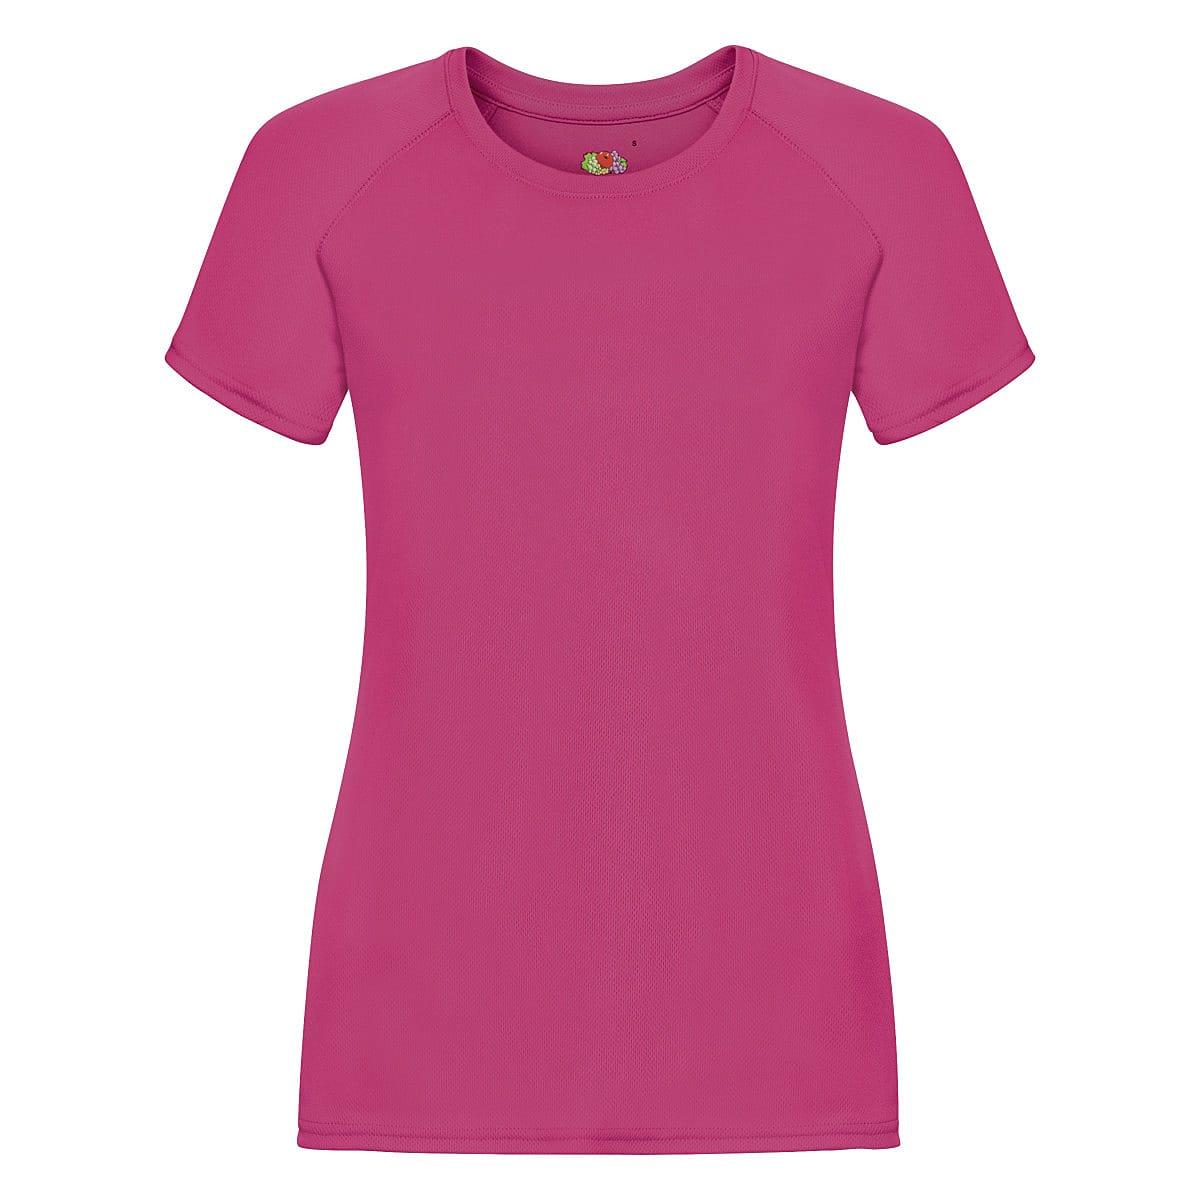 Fruit Of The Loom Womens Performance T-Shirt in Fuchsia (Product Code: 61392)